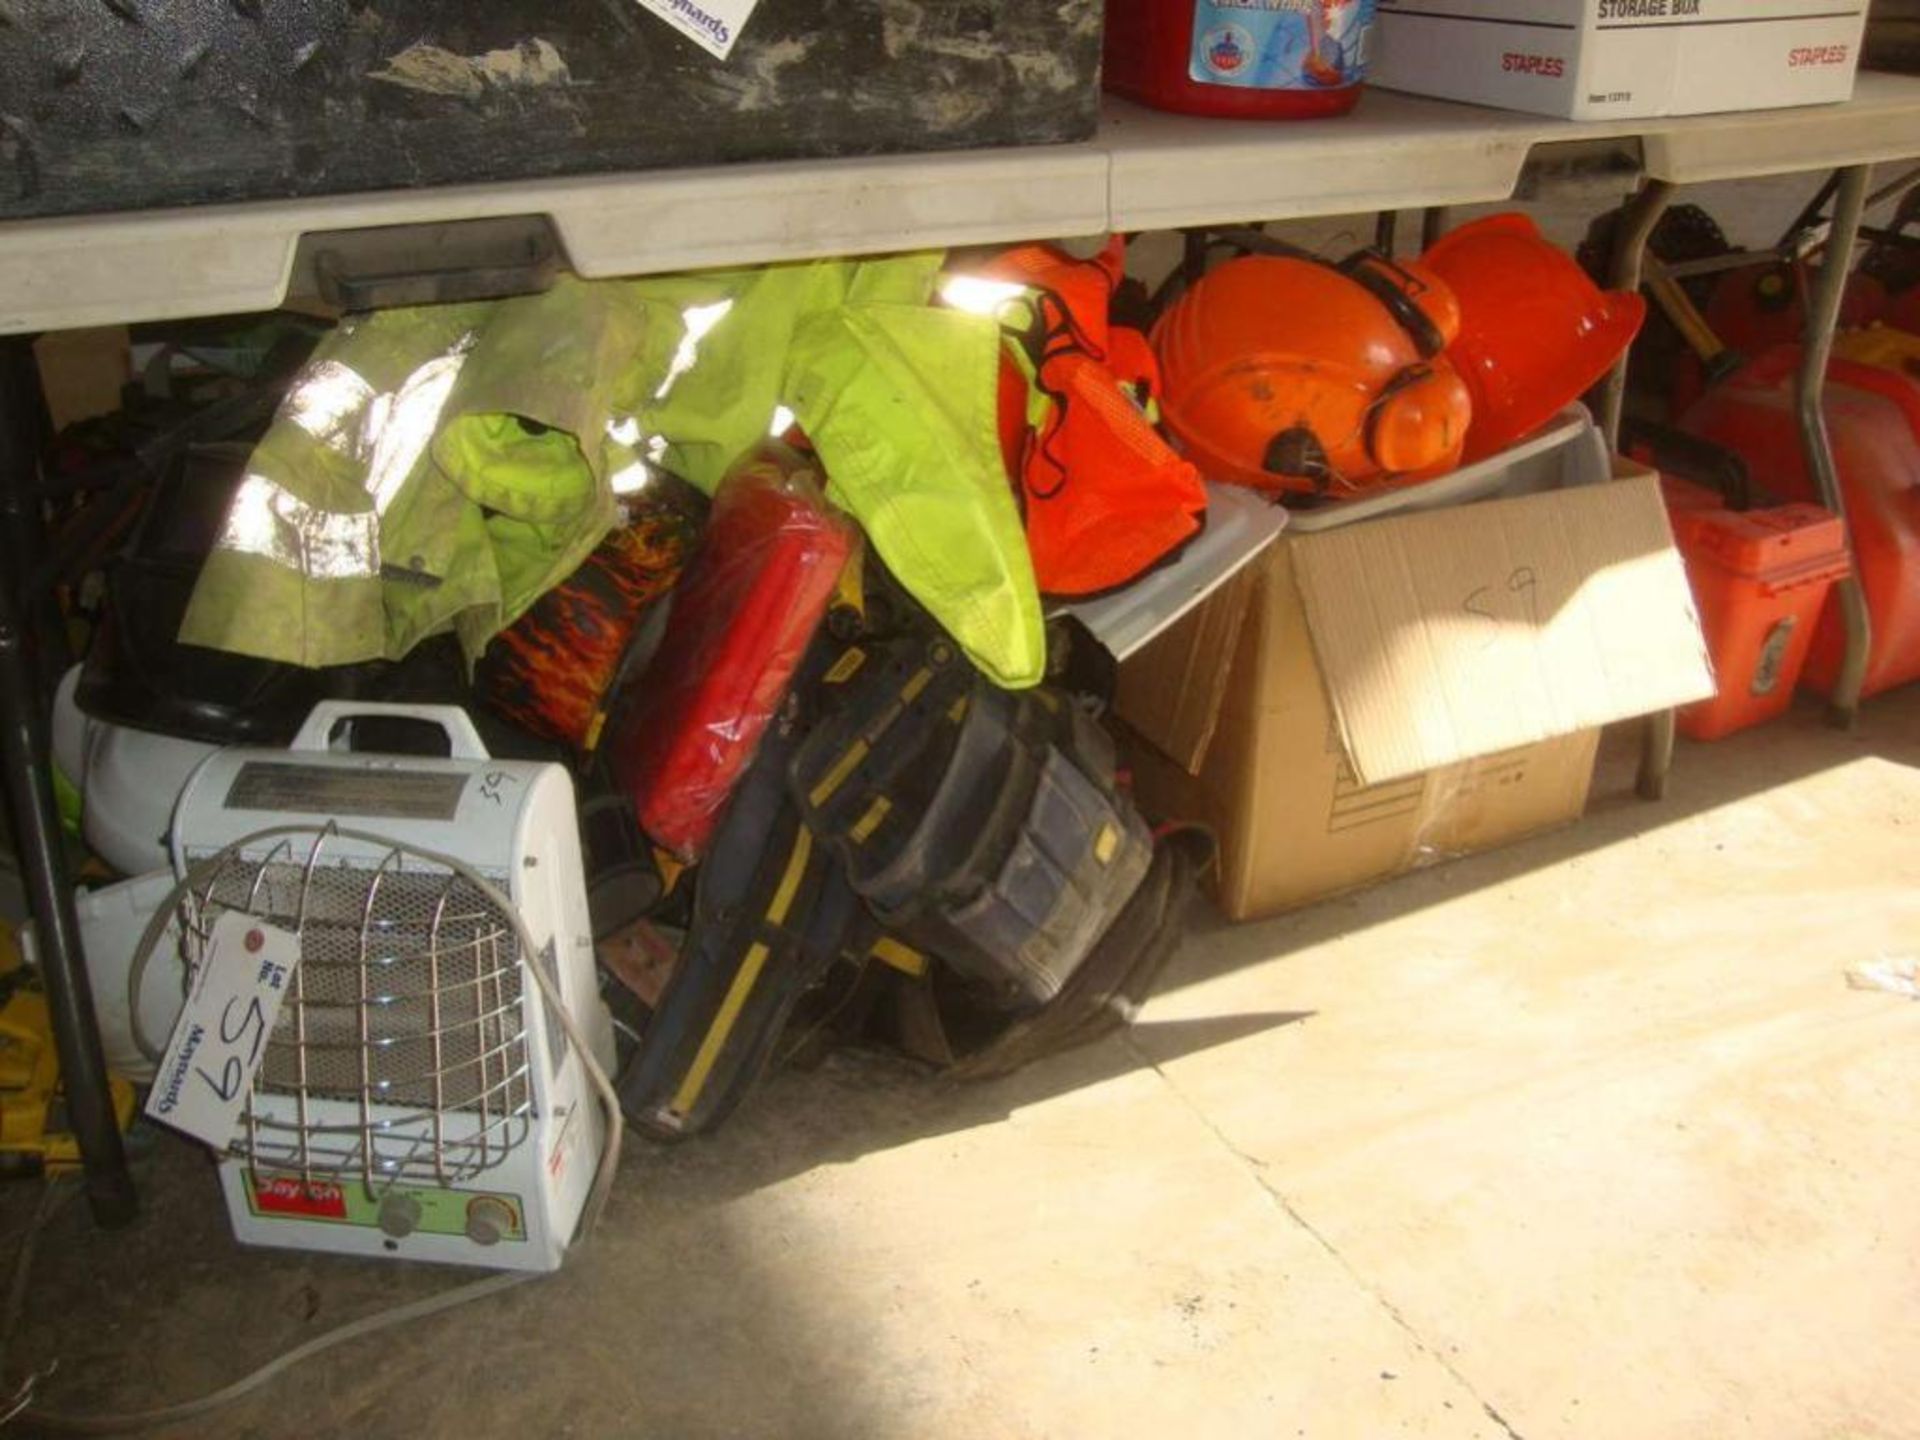 Lot of safety gear